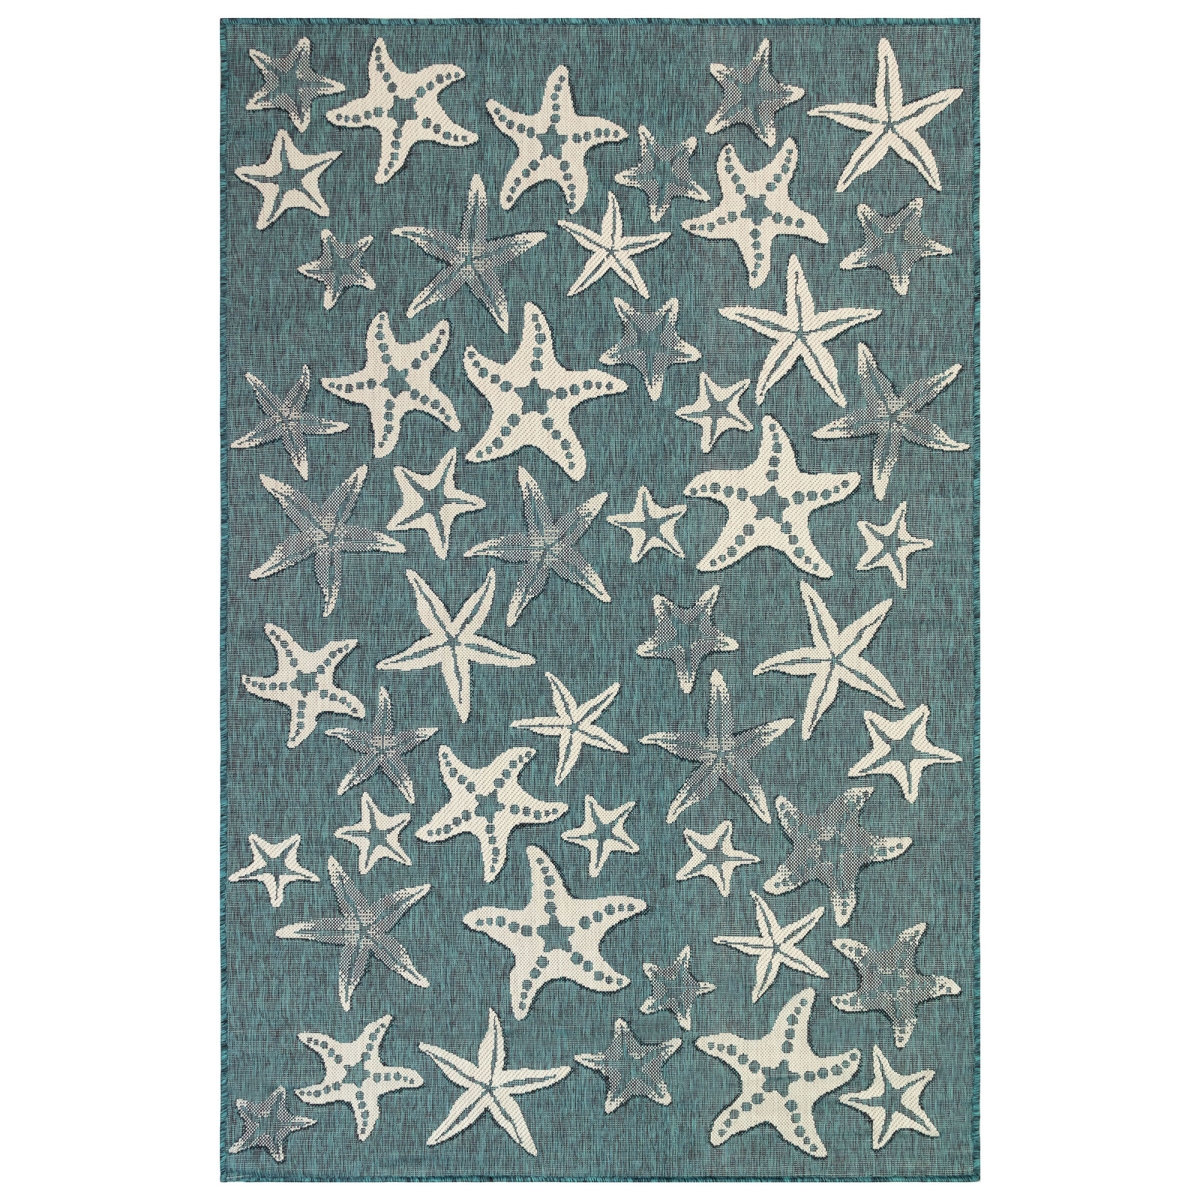 Cre91841594 Liora Manne Carmel Starfish Indoor & Outdoor Rug, Teal - 8 Ft. 10 In. X 11 Ft. 9 In.